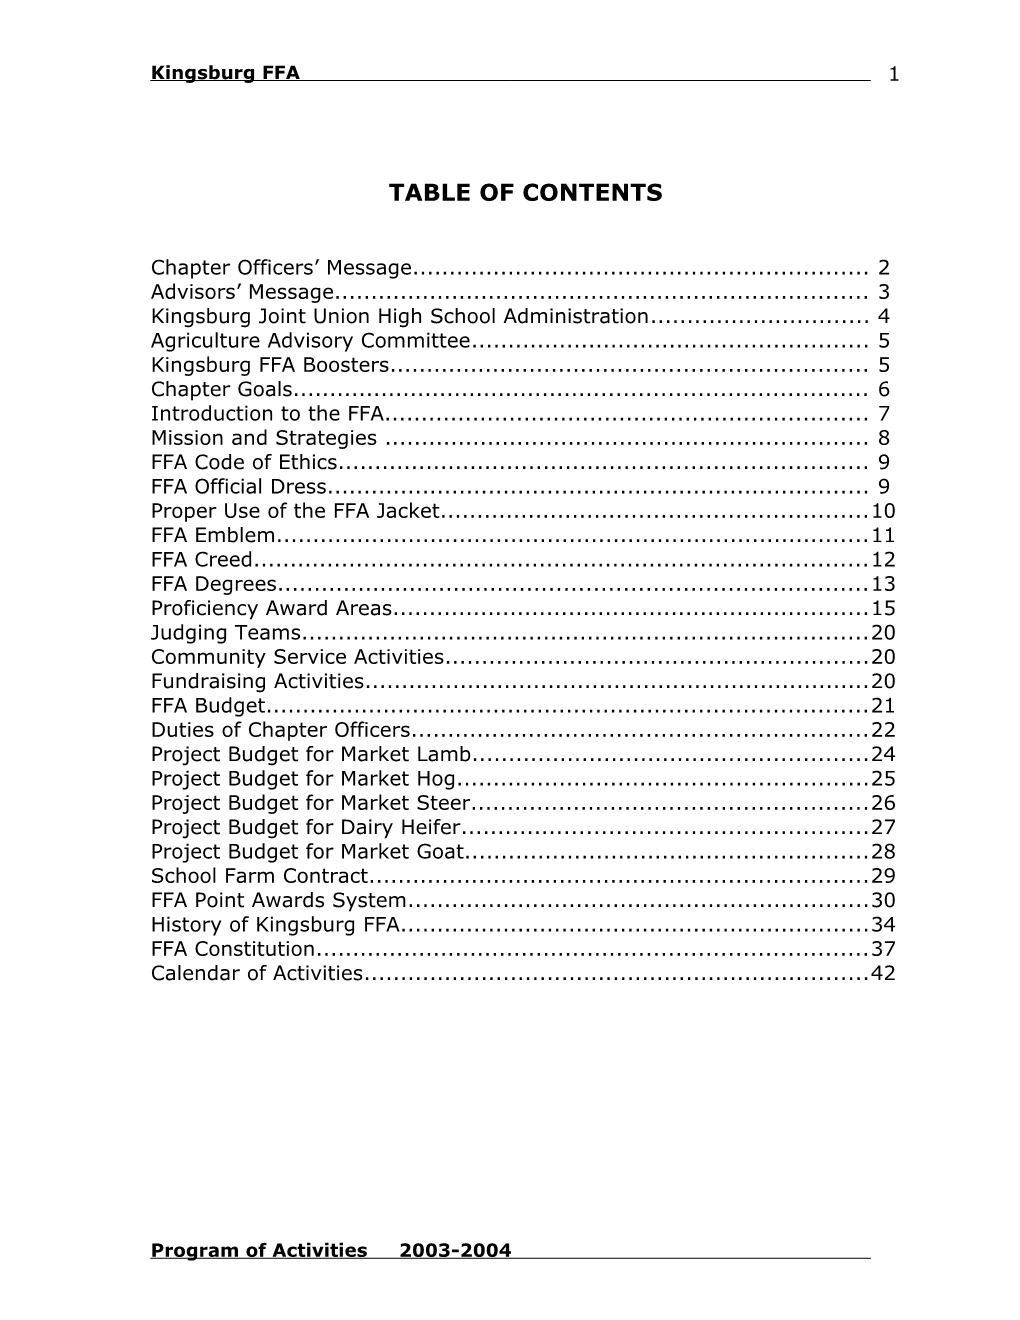 Table of Contents s339